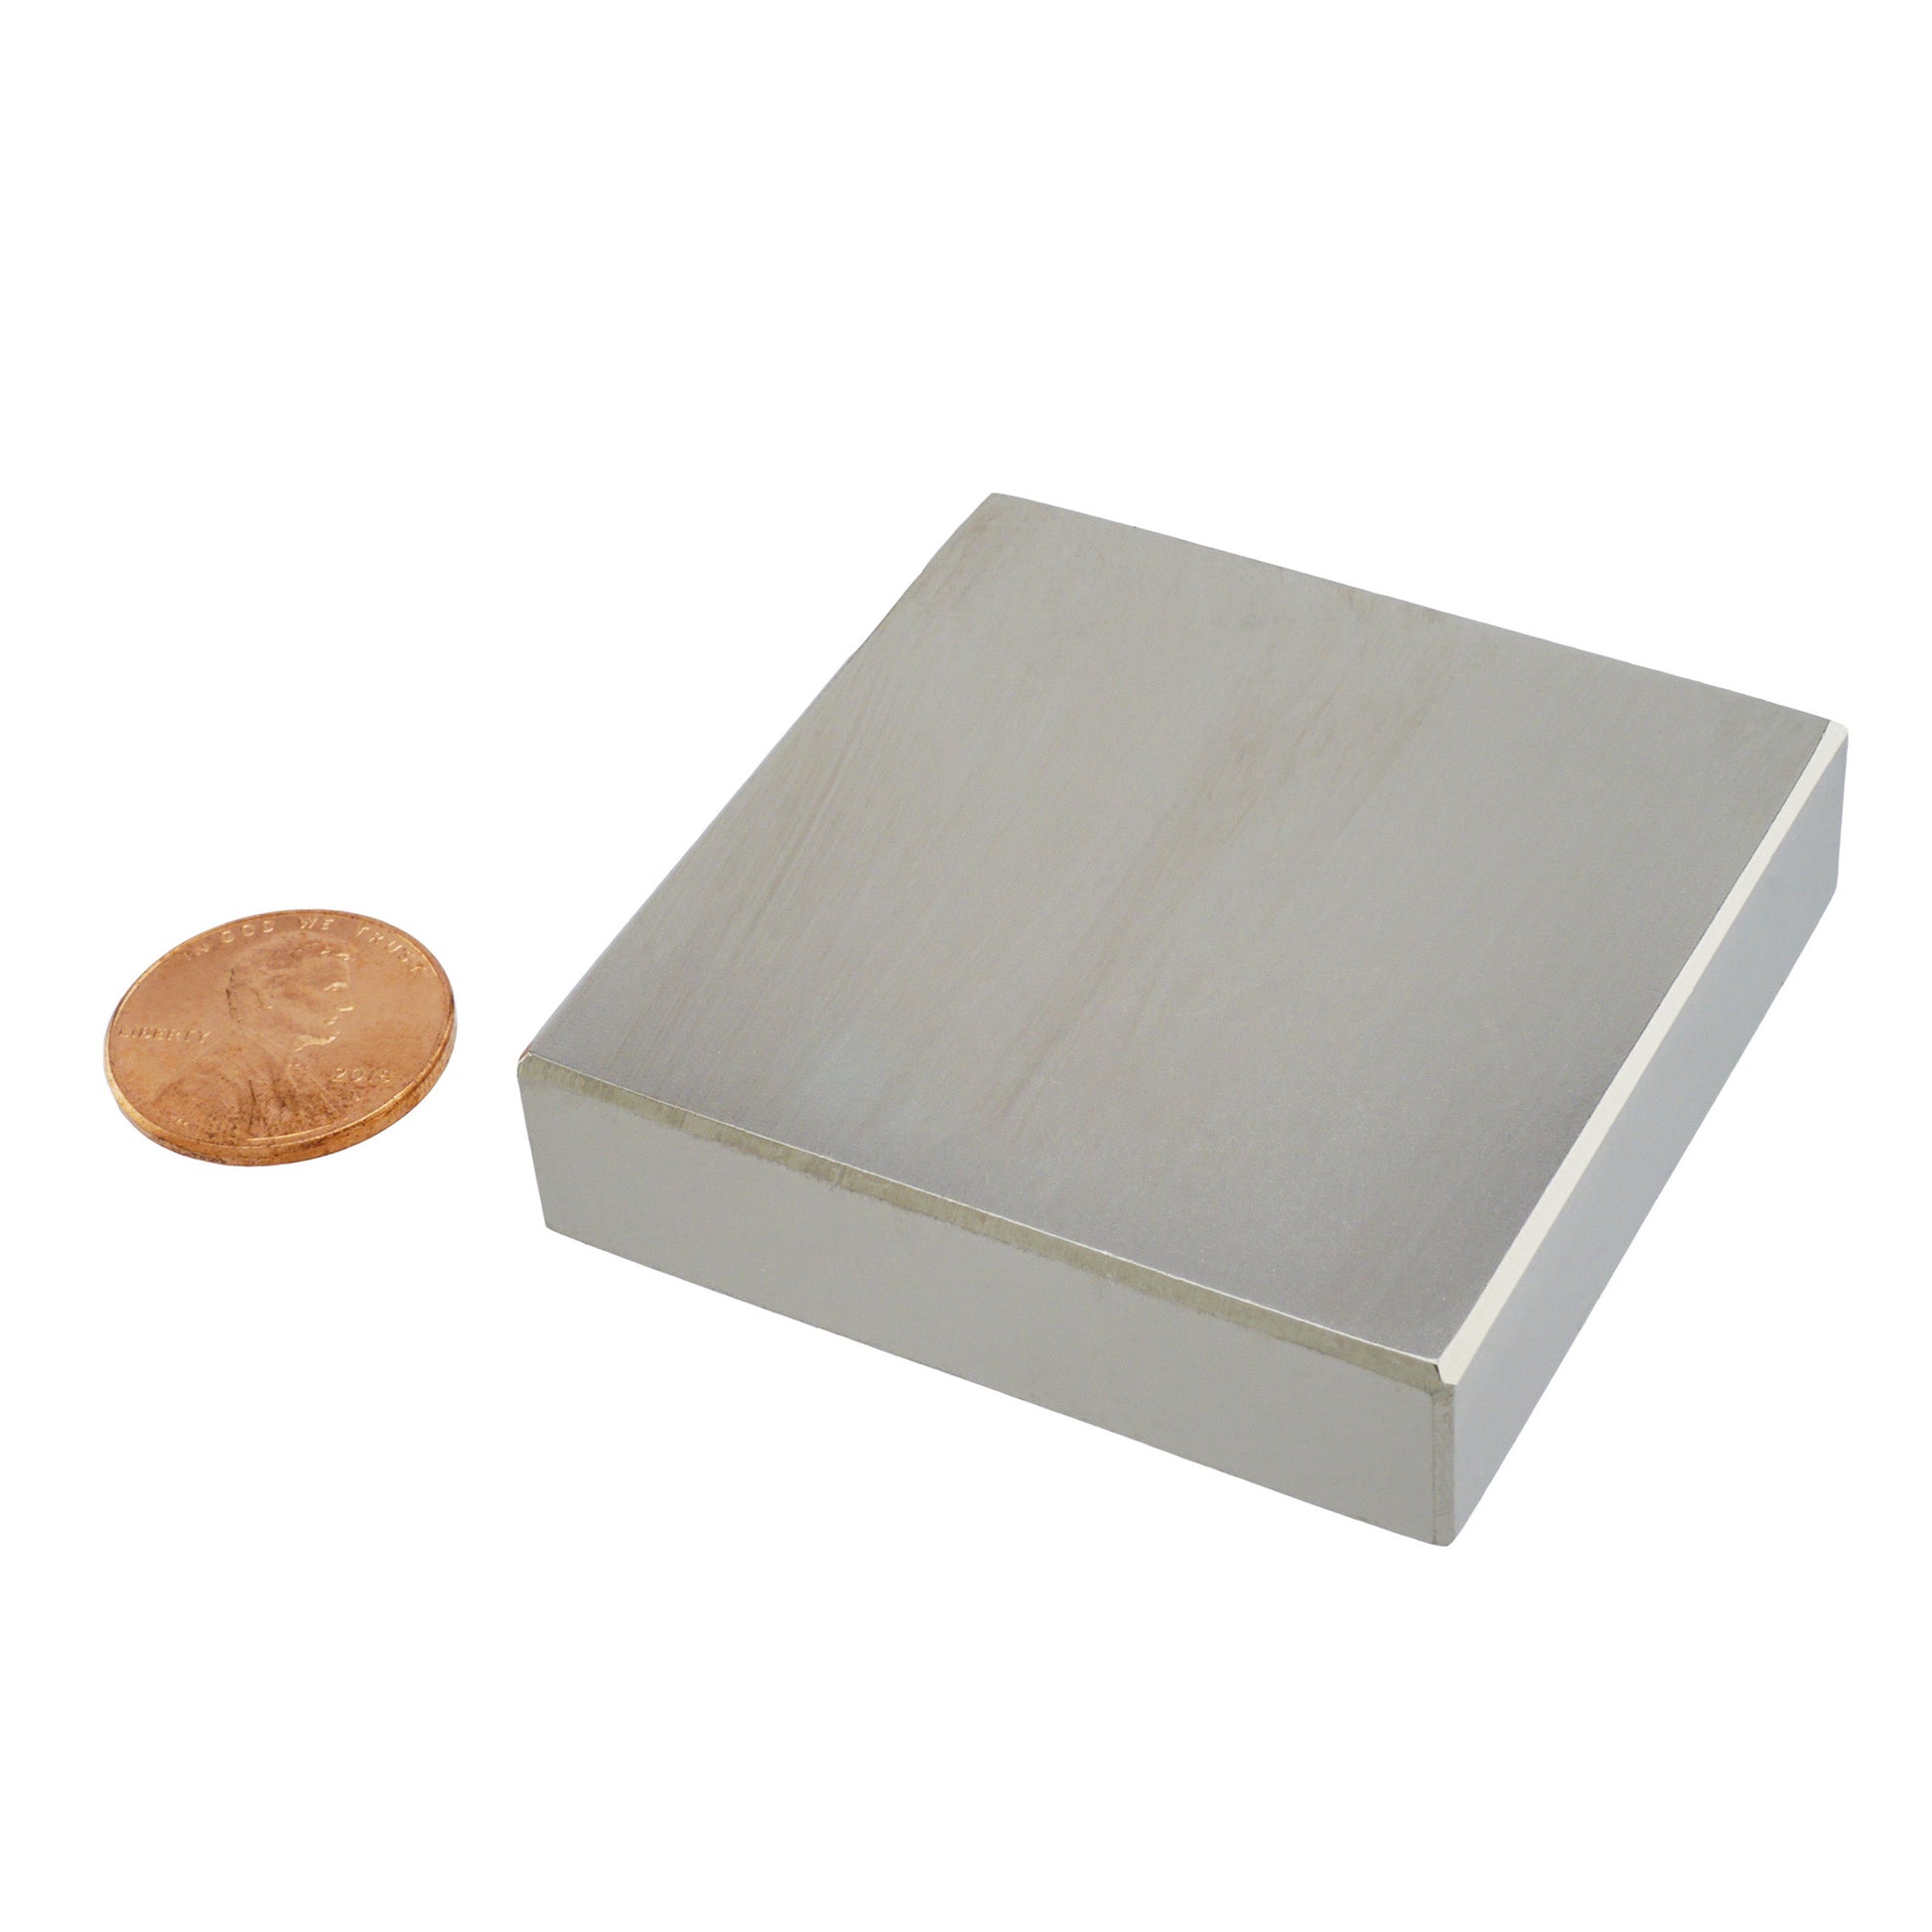 Load image into Gallery viewer, NB058N-35 Neodymium Block Magnet - Compared to Penny for Size Reference